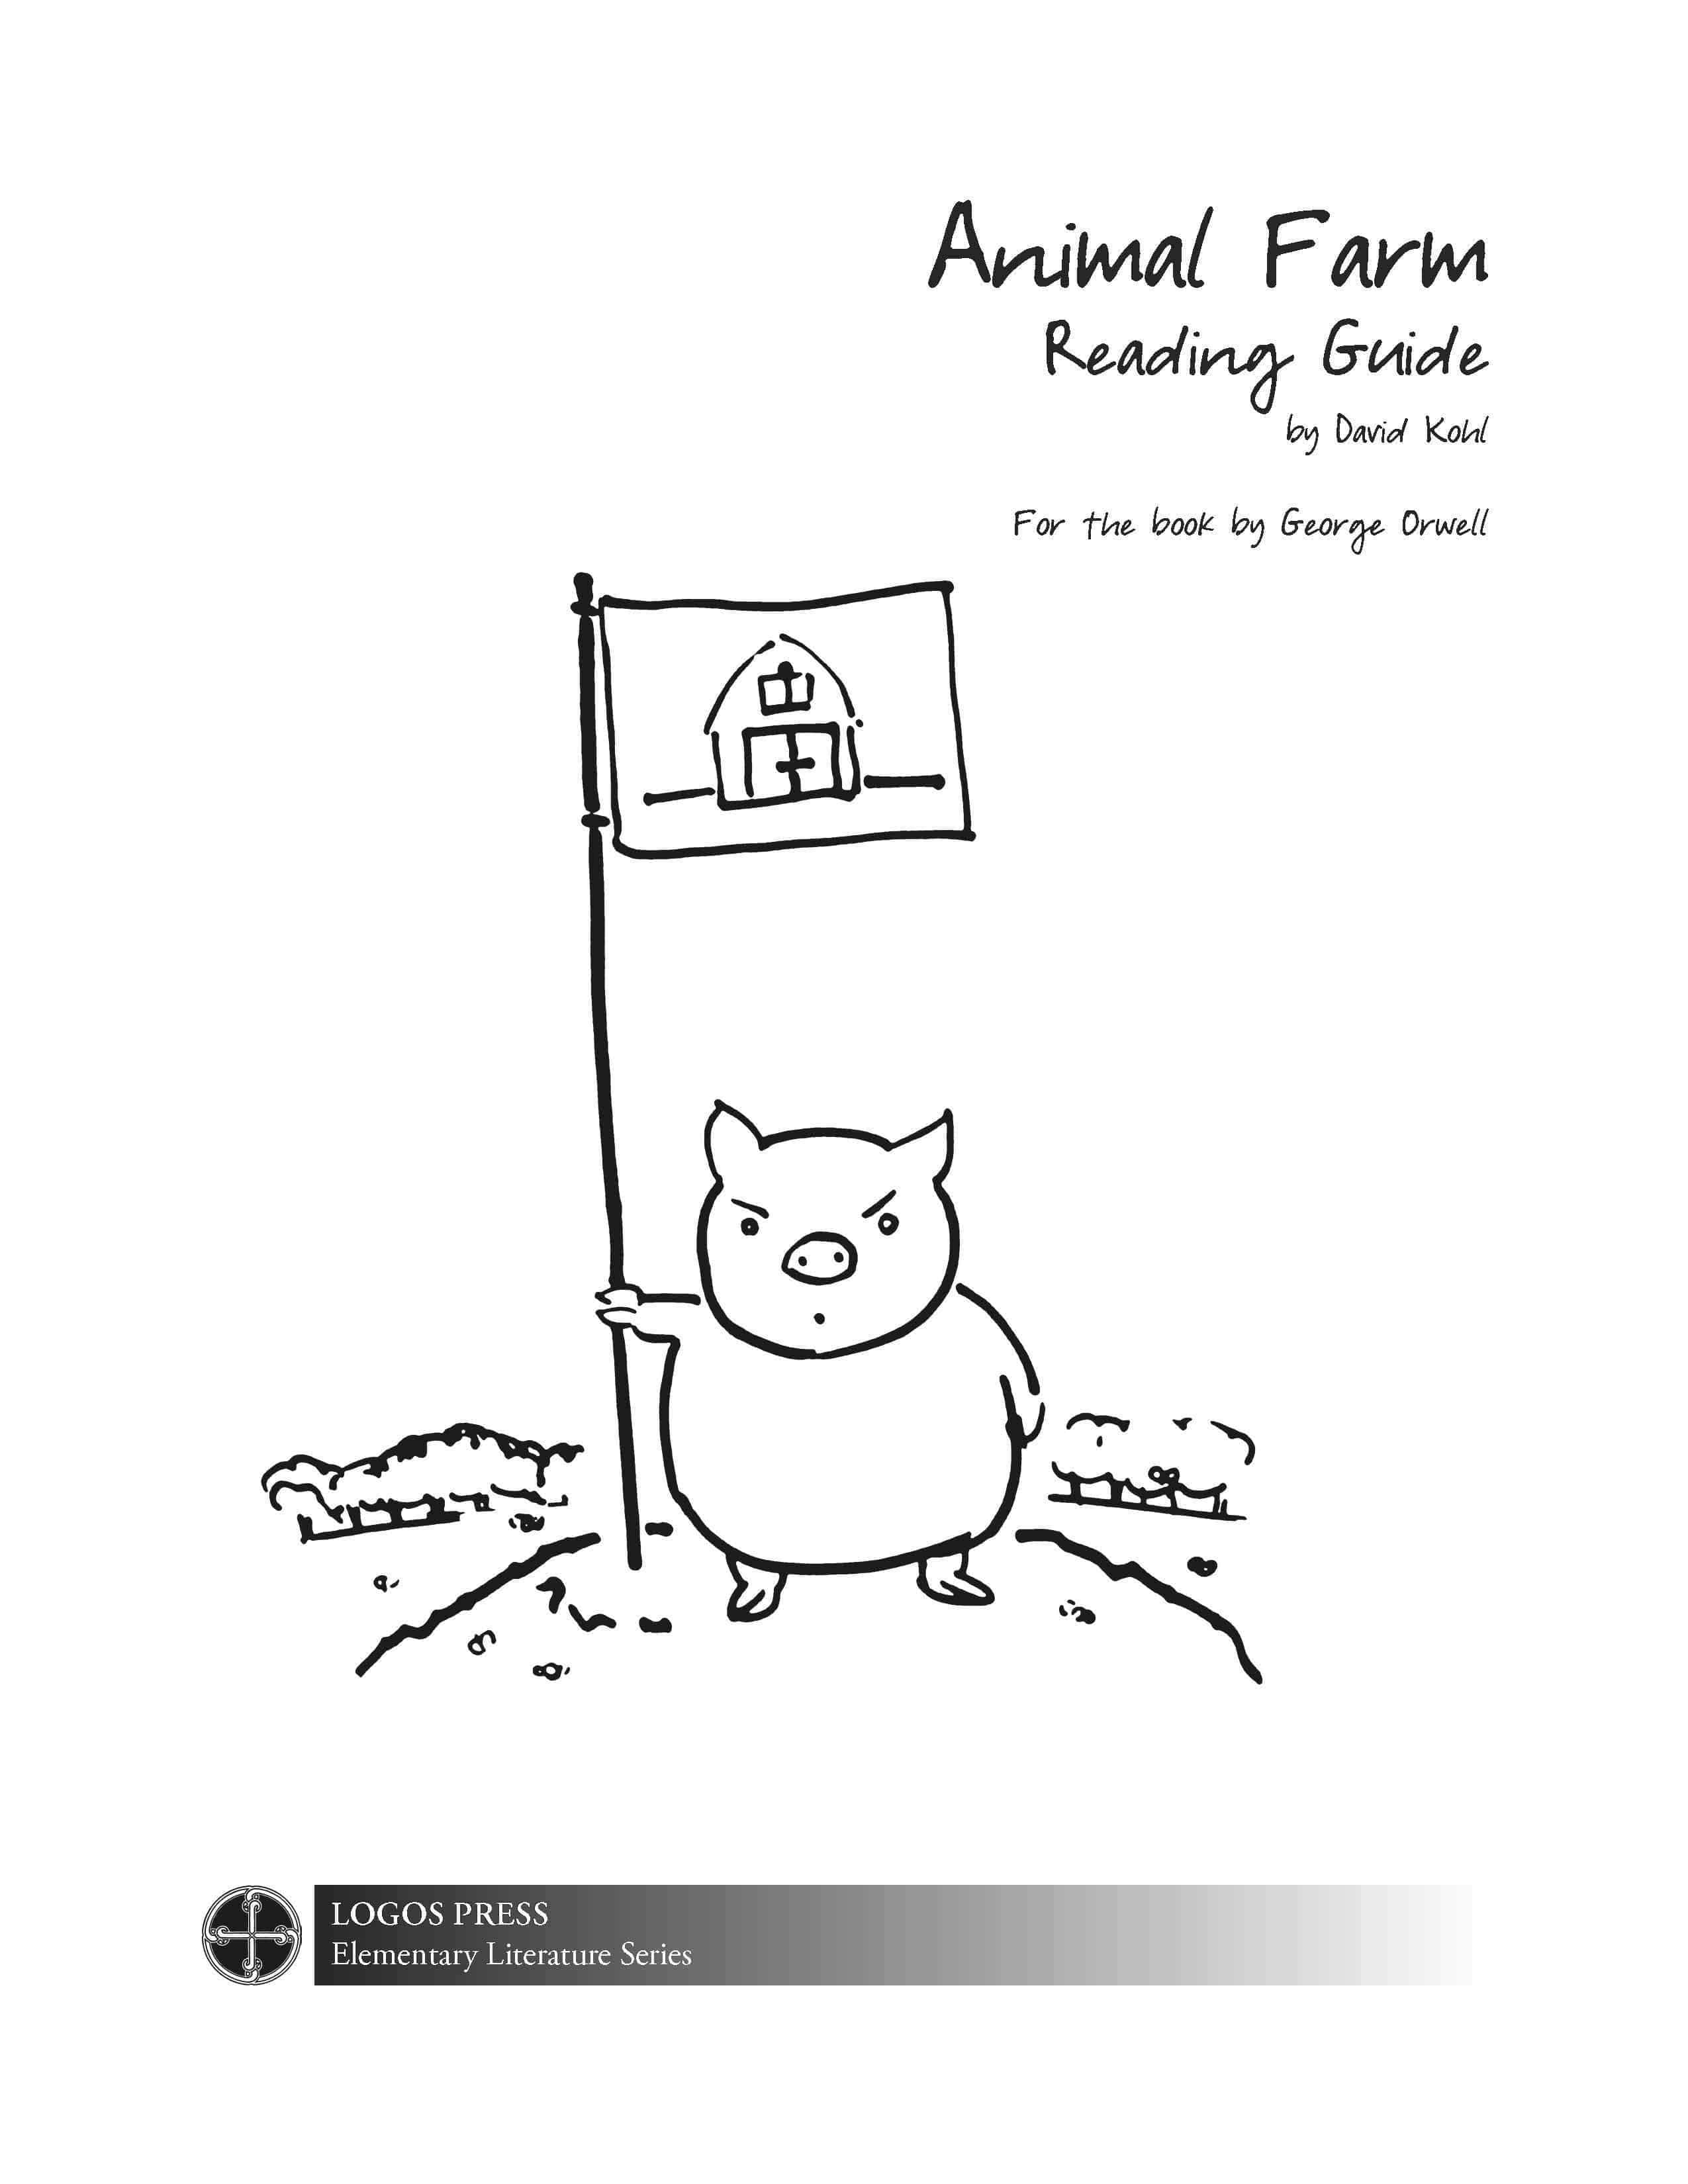 Animal Farm - Reading Guide (Download)